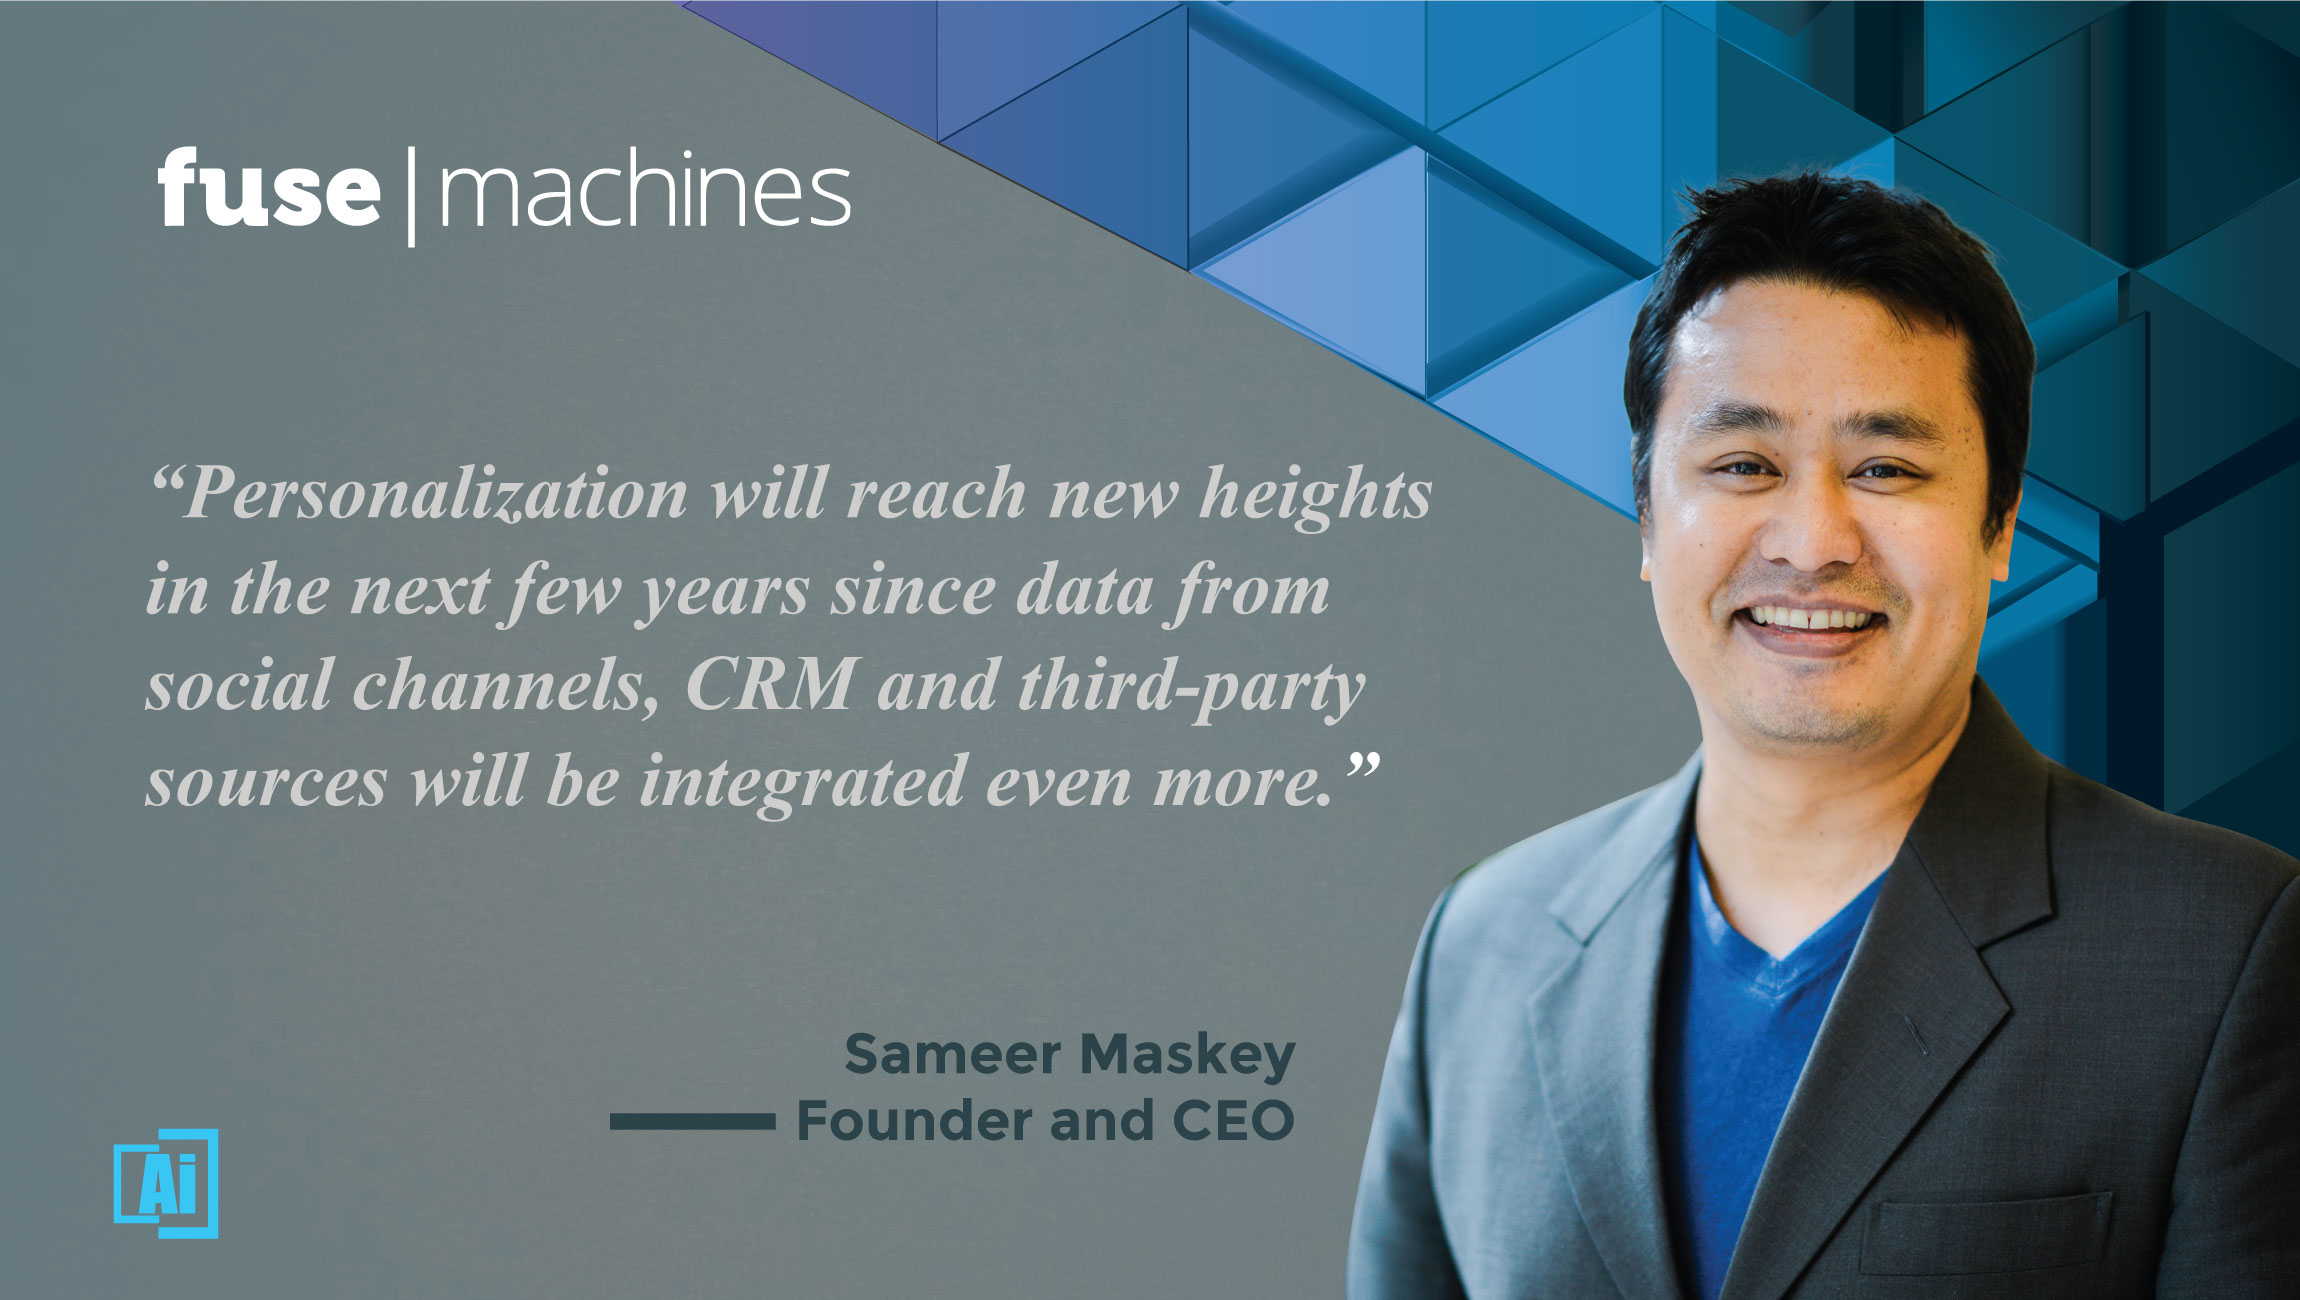 Weaponization of AI Is a Real Threat, Says Fusemachines CEO Sameer Maskey quotes